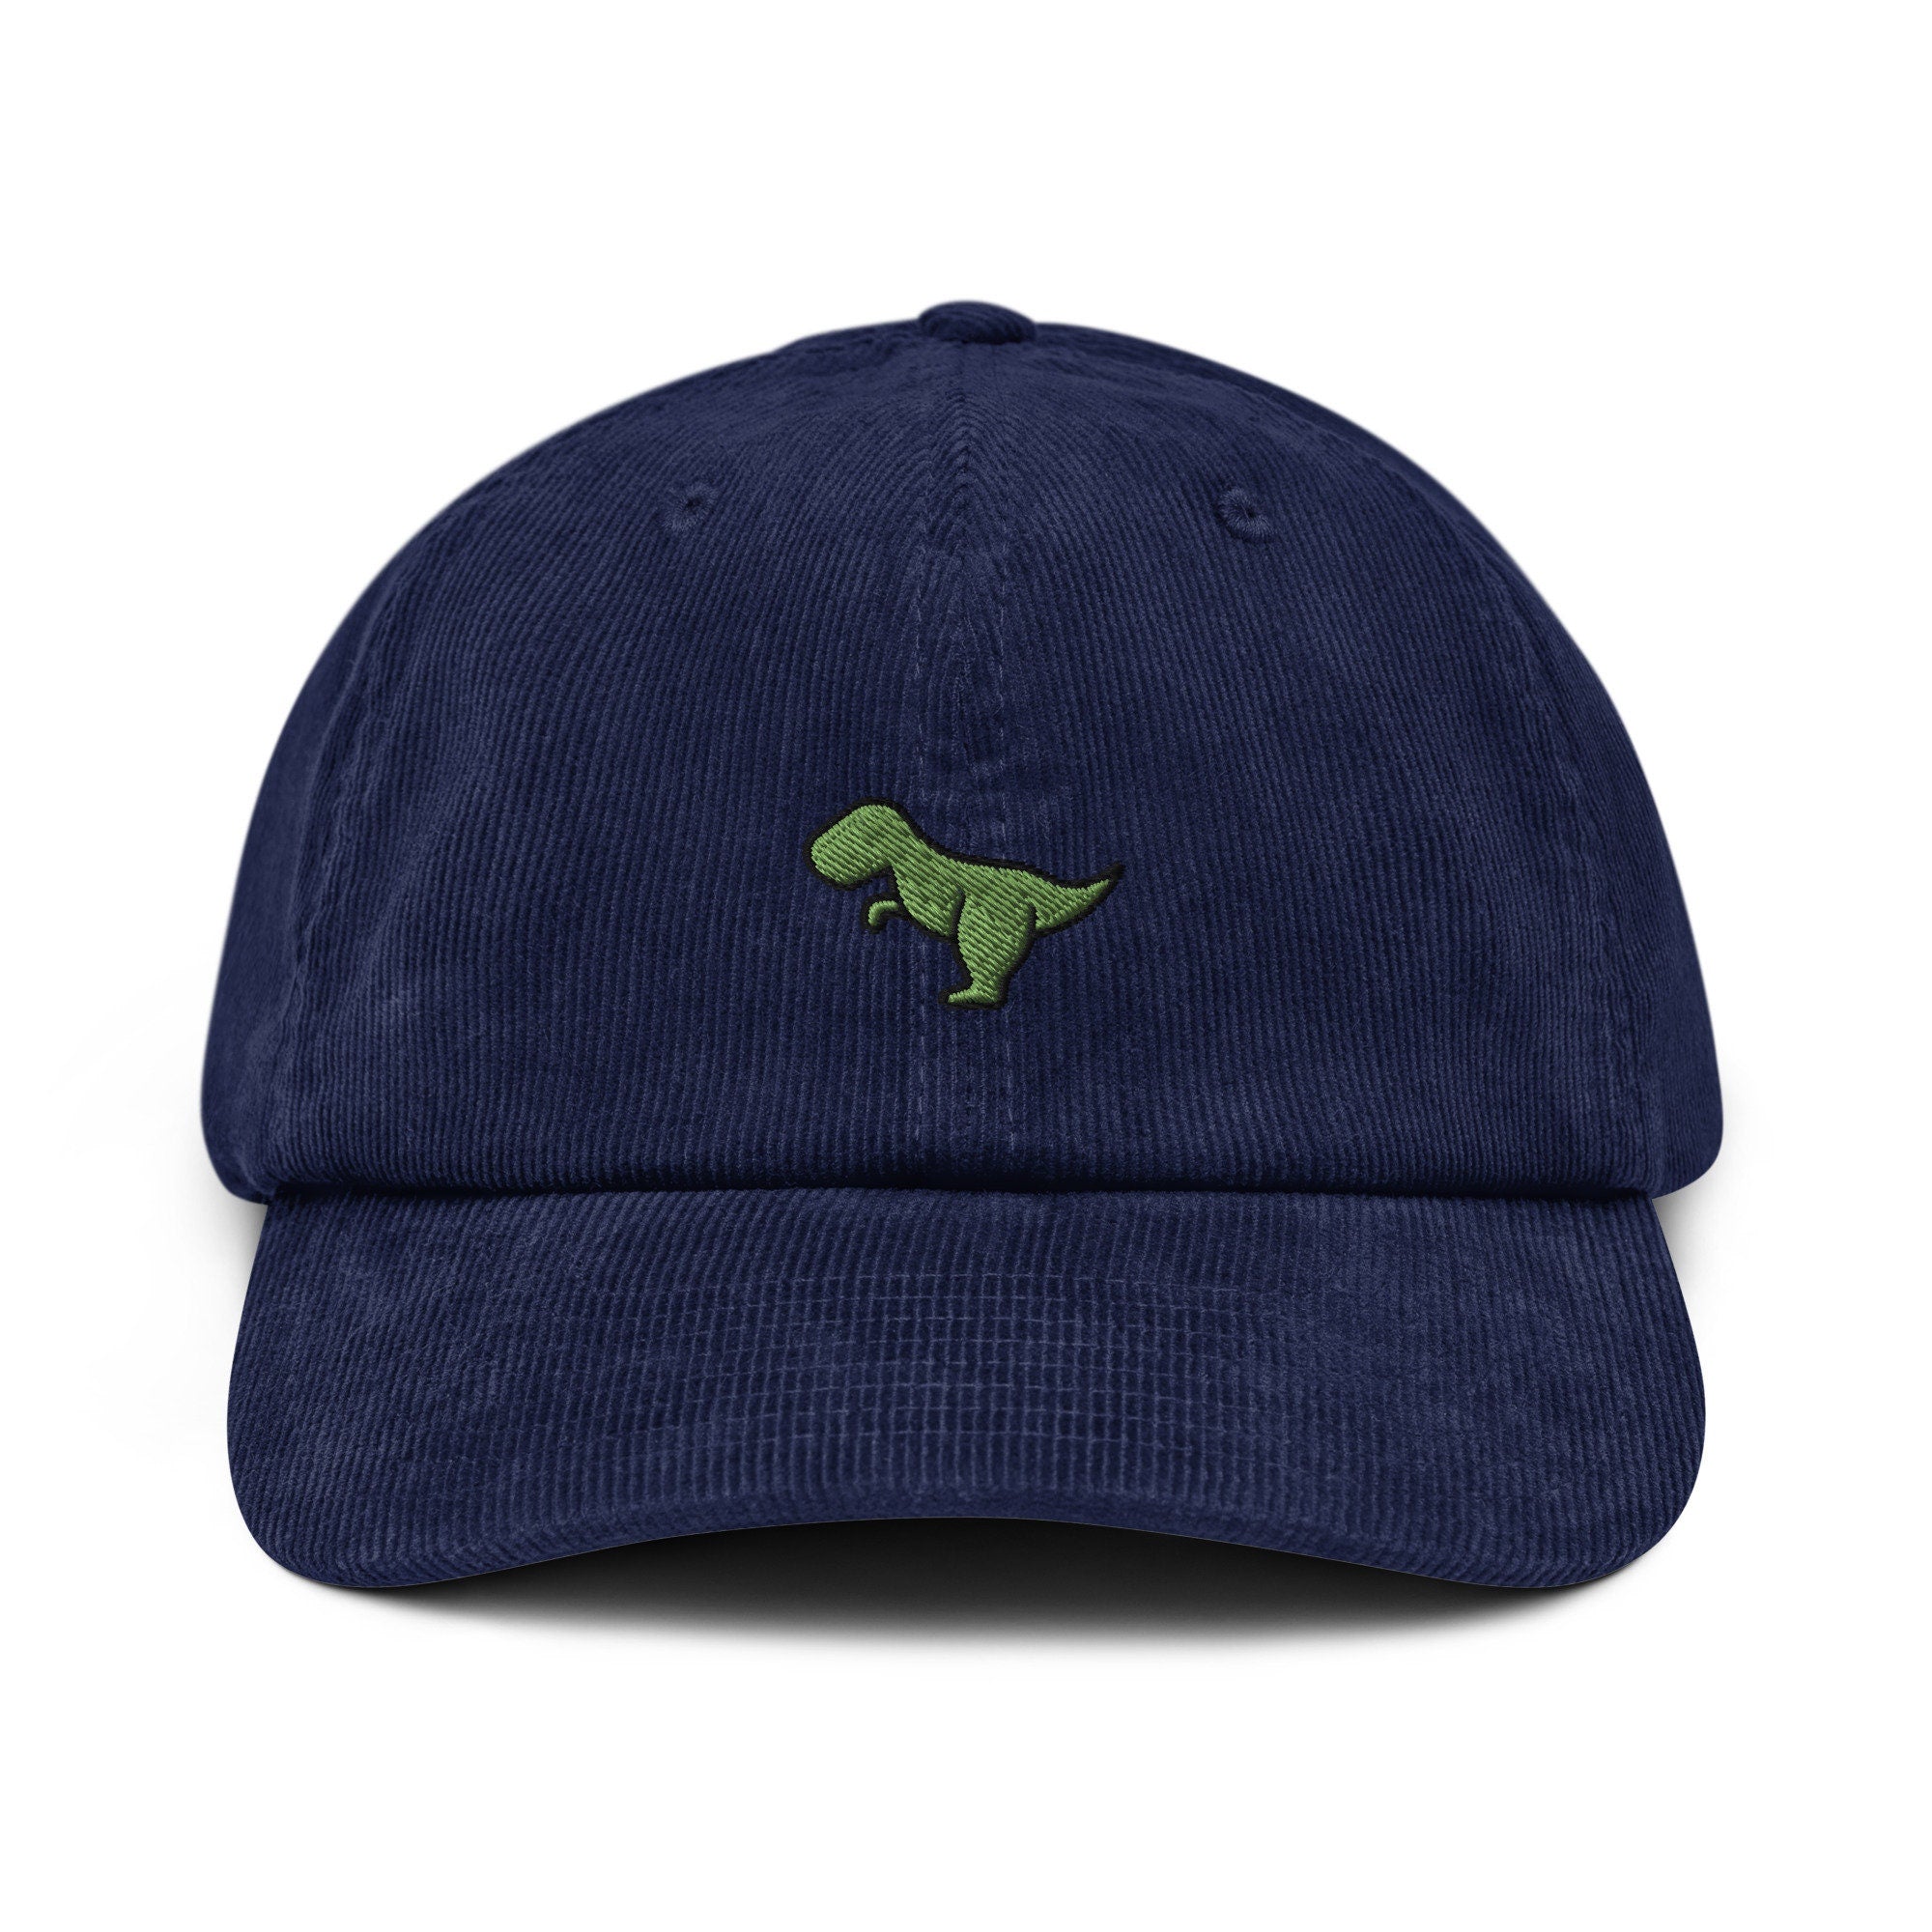 T-Rex Corduroy Hat, Handmade Embroidered Corduroy Dad Cap - Multiple Colors